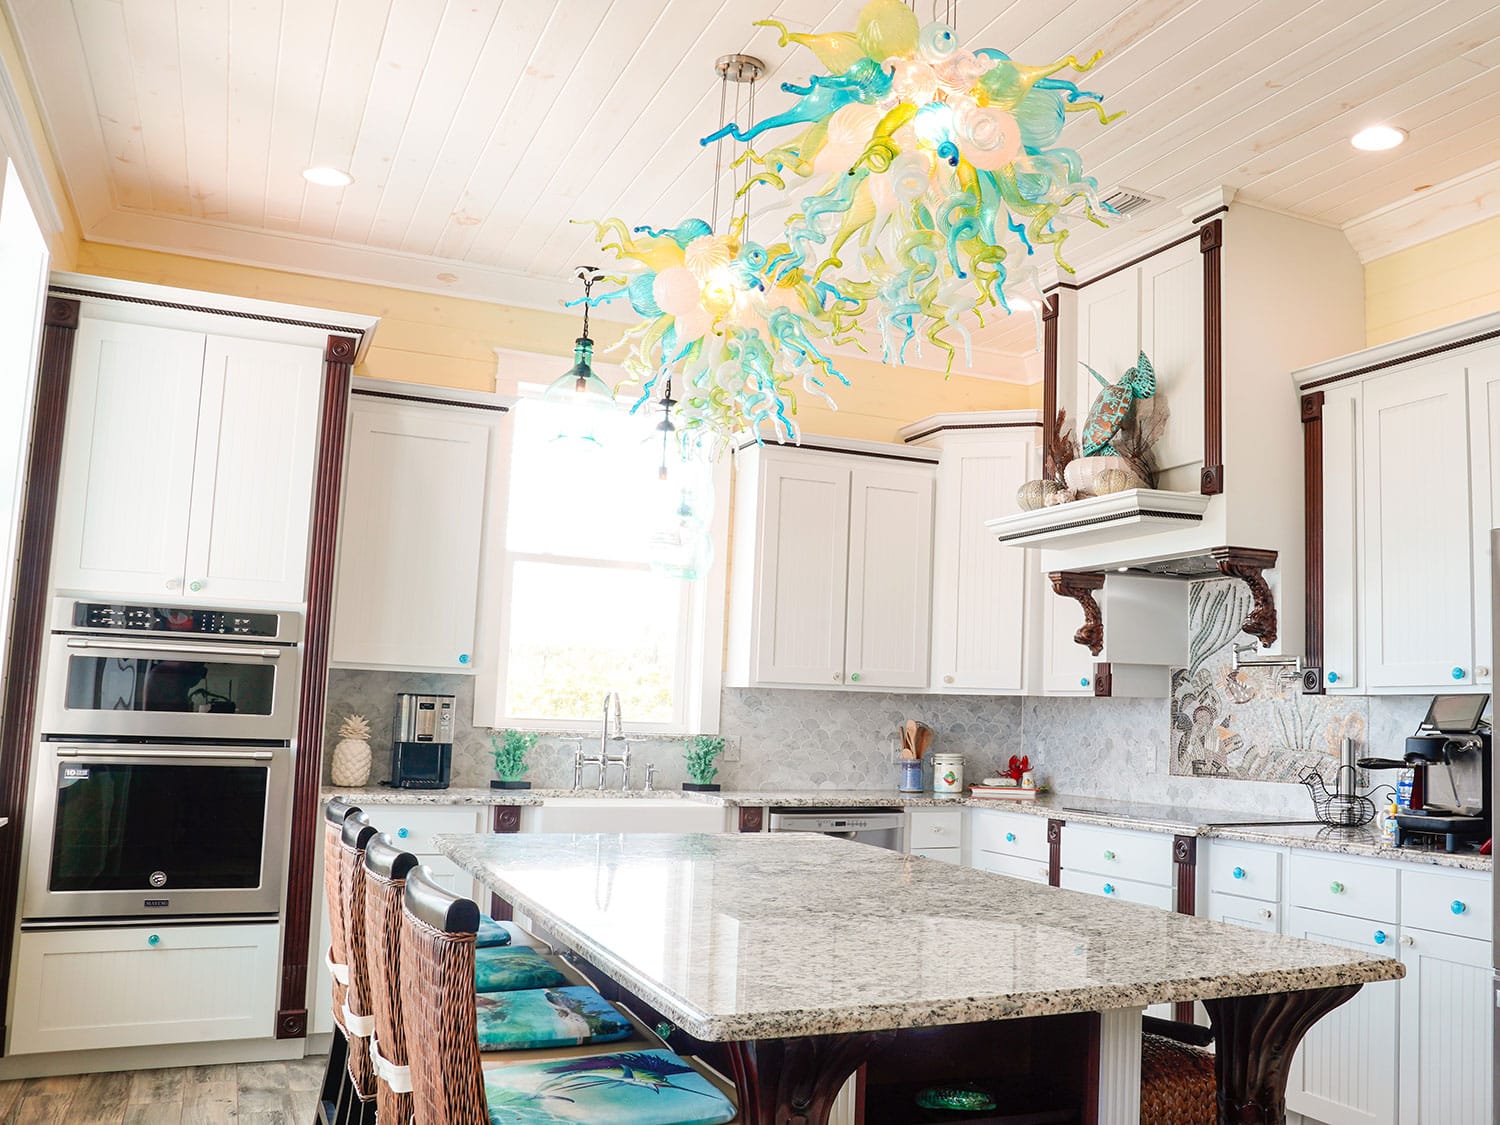 The kitchen of the Shellona Abaco Beach House rental, located in the Bahama Palm Shores neighborhood in the Bahamas.